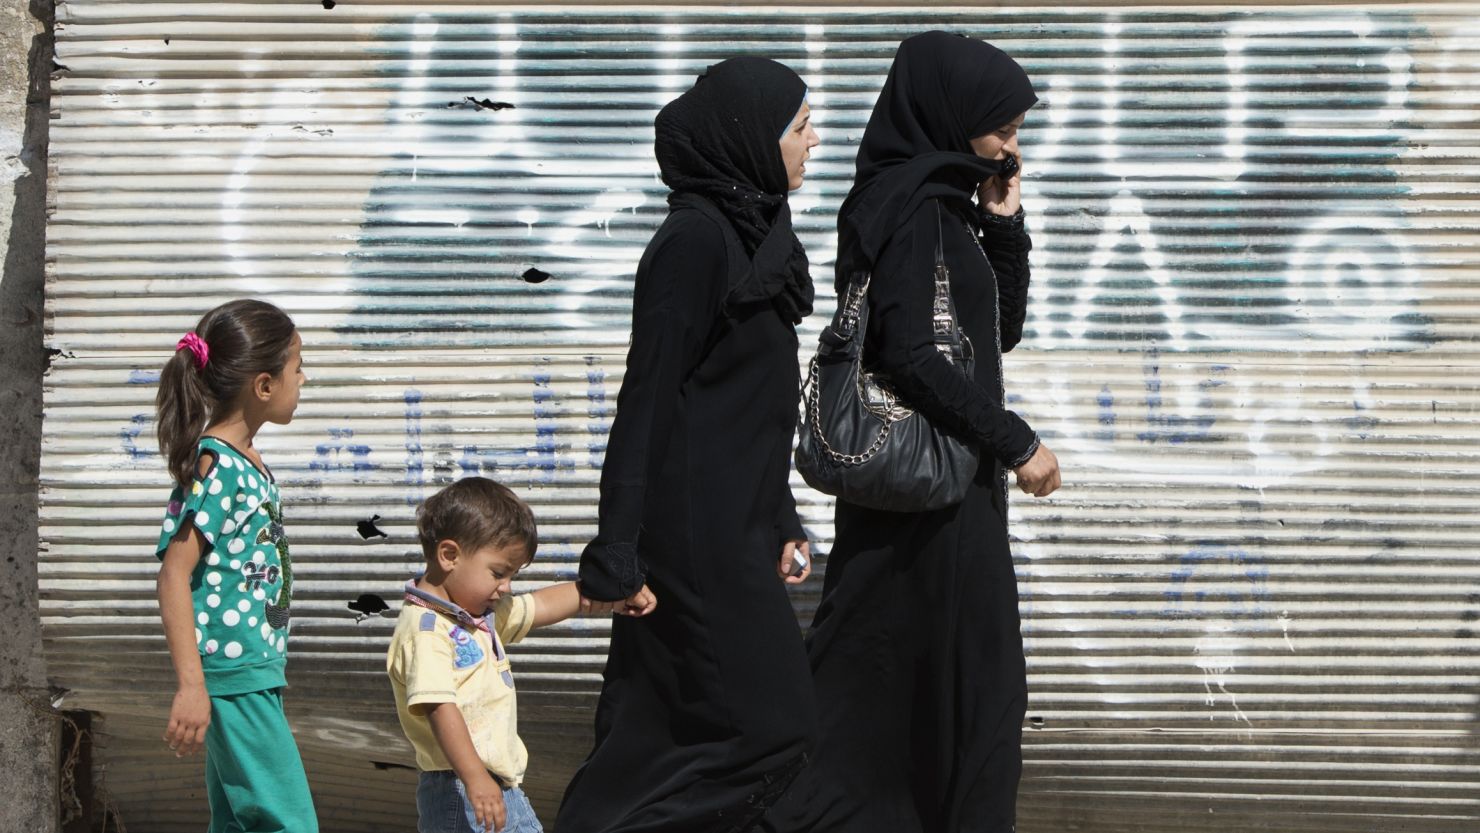 Syrian women walk past a closed shop in  Azaz. Violence against women is a big part of the war in Syria.

